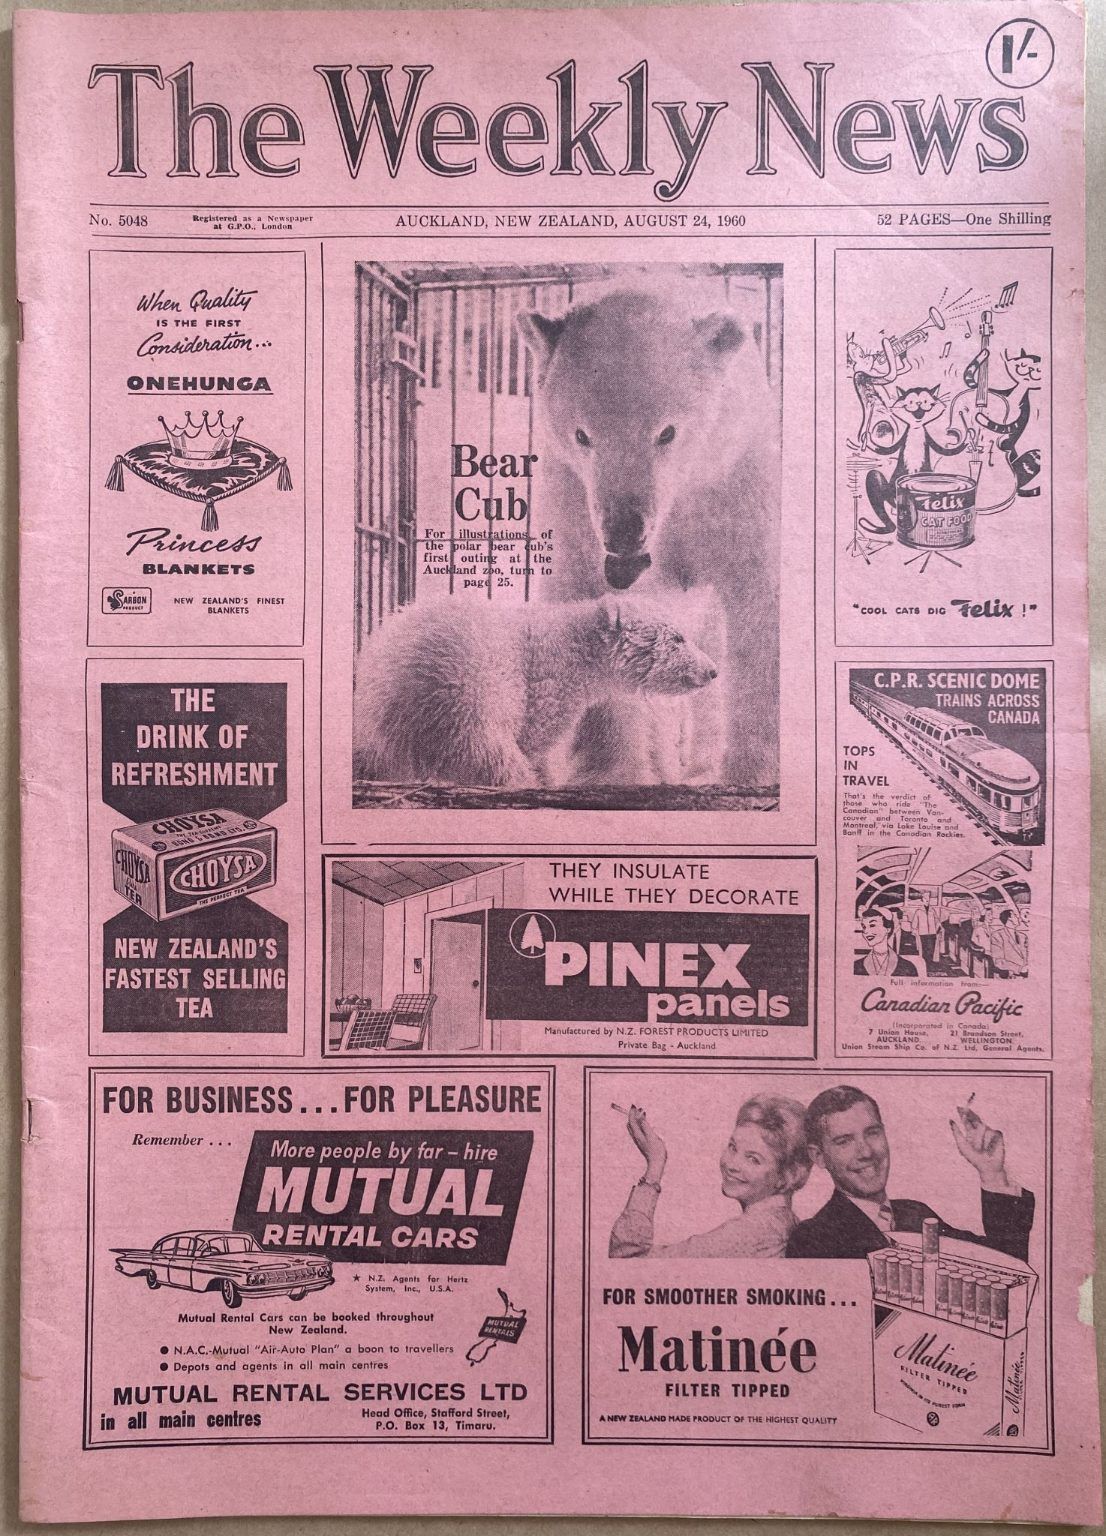 OLD NEWSPAPER: The Weekly News, No. 5048, 24 August 1960